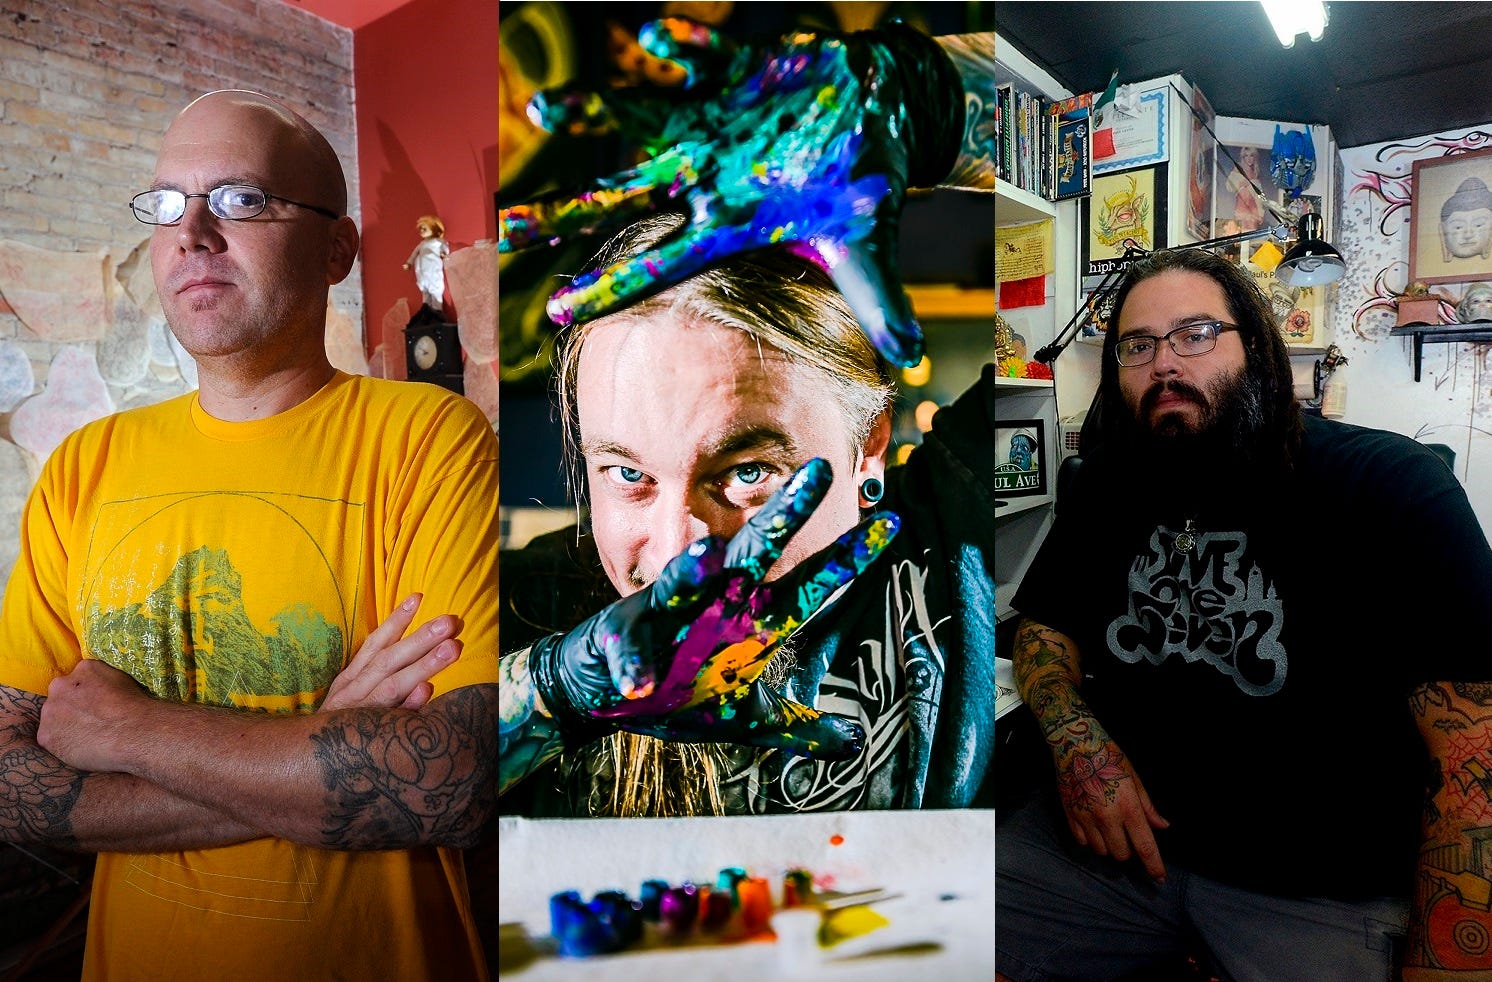 Old Town tattoo artist to compete for 100K on Ink Master